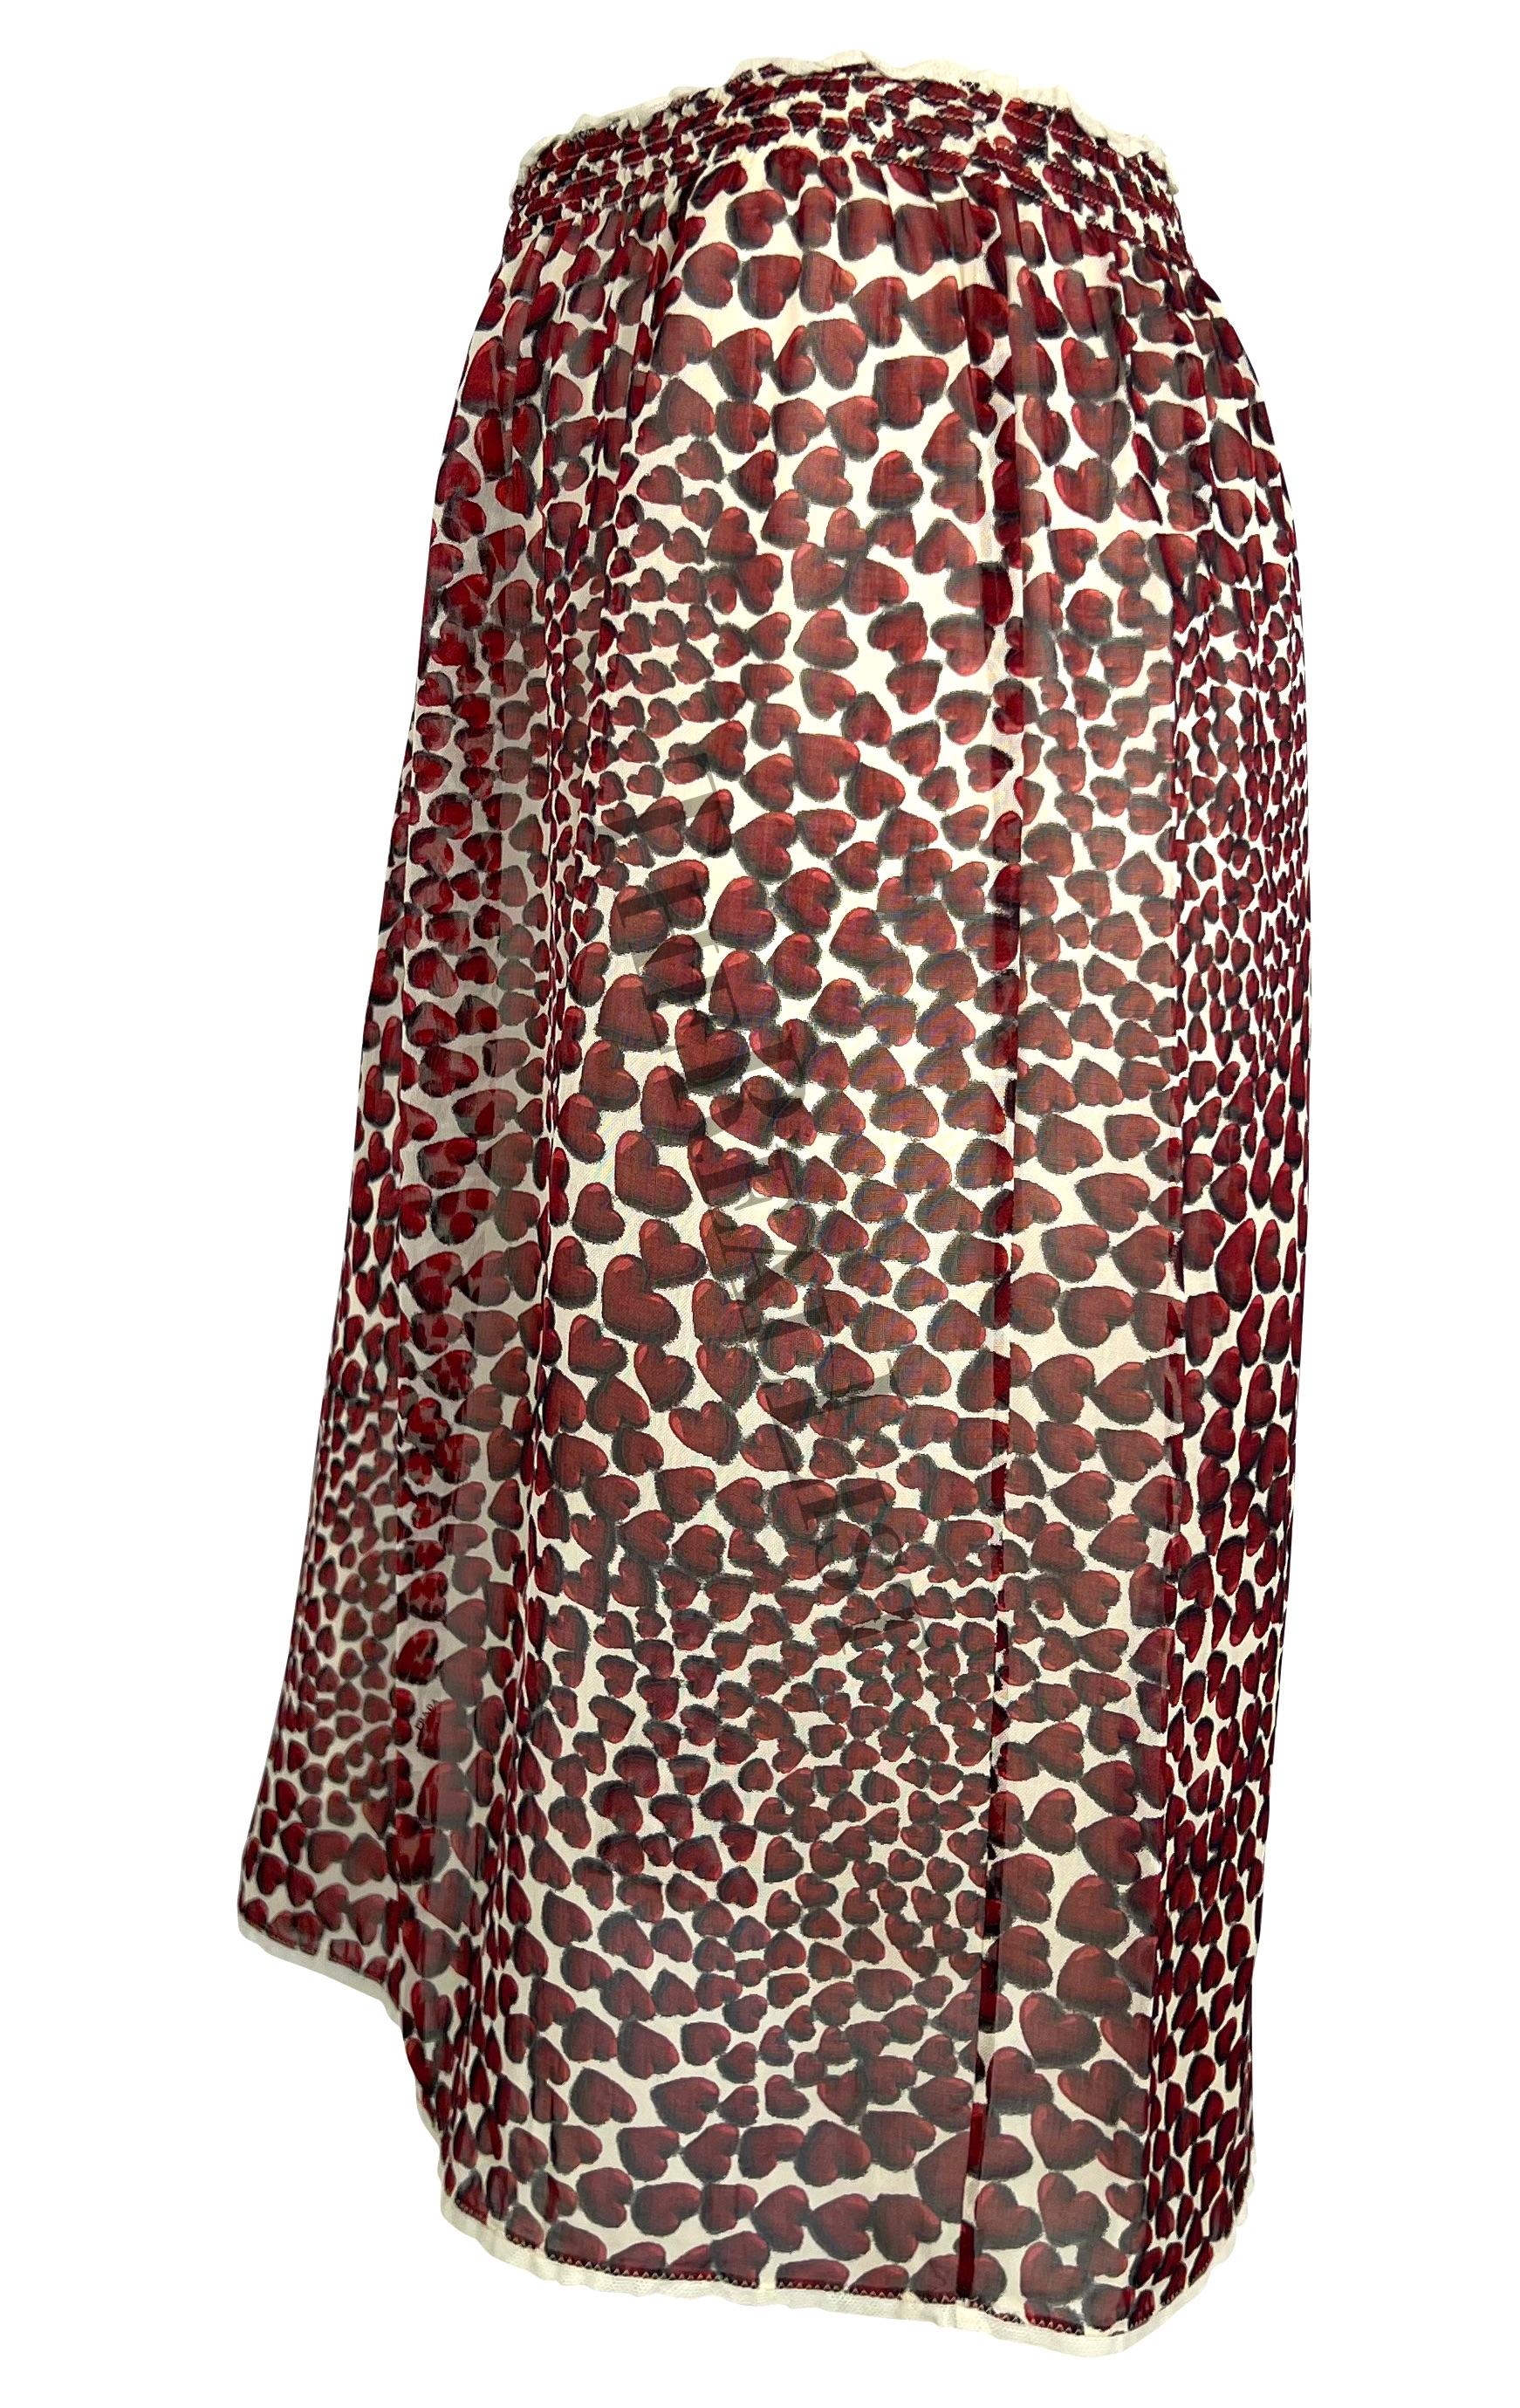 S/S 2000 Prada by Miuccia Runway Semi-Sheer Heart Print Chiffon Skirt In Excellent Condition In West Hollywood, CA